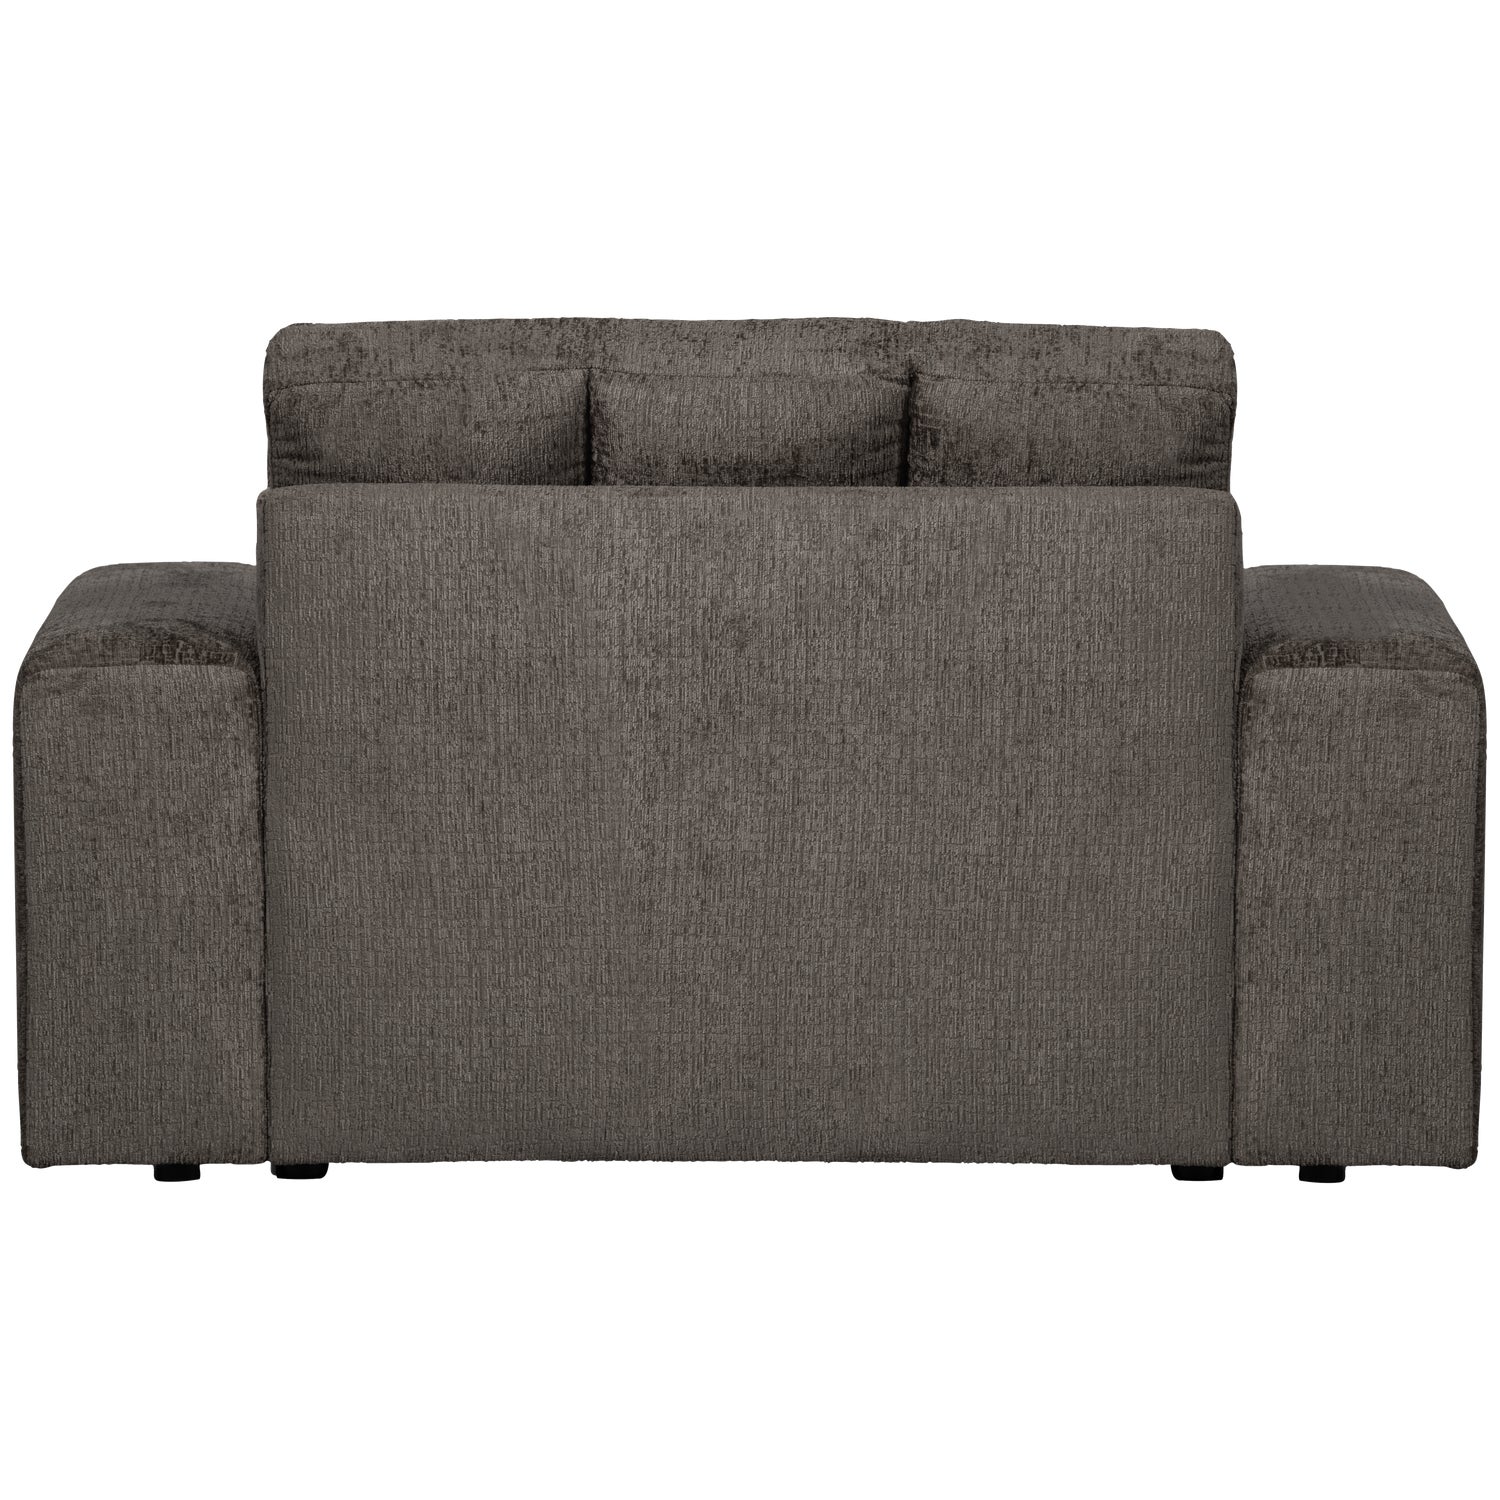 379006-MO-02_VS_WE_second_date_loveseat_structure_velvet_mountain_AK1.png?auto=webp&format=png&width=1500&height=1500